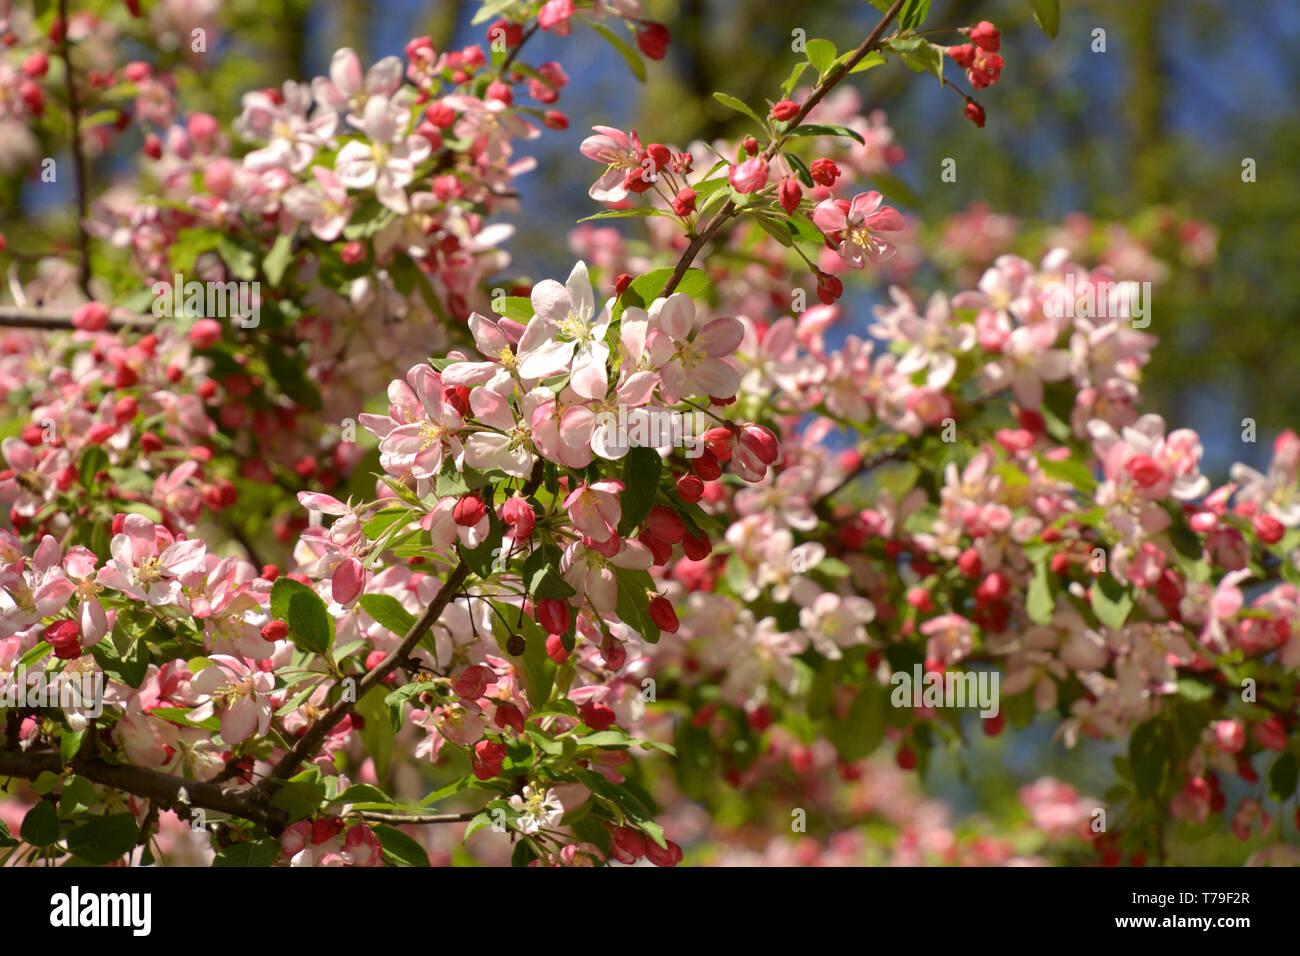 malus floribunda or japenese crab or purple chokeberry in spring, showy crabapple branches in bloom Stock Photo